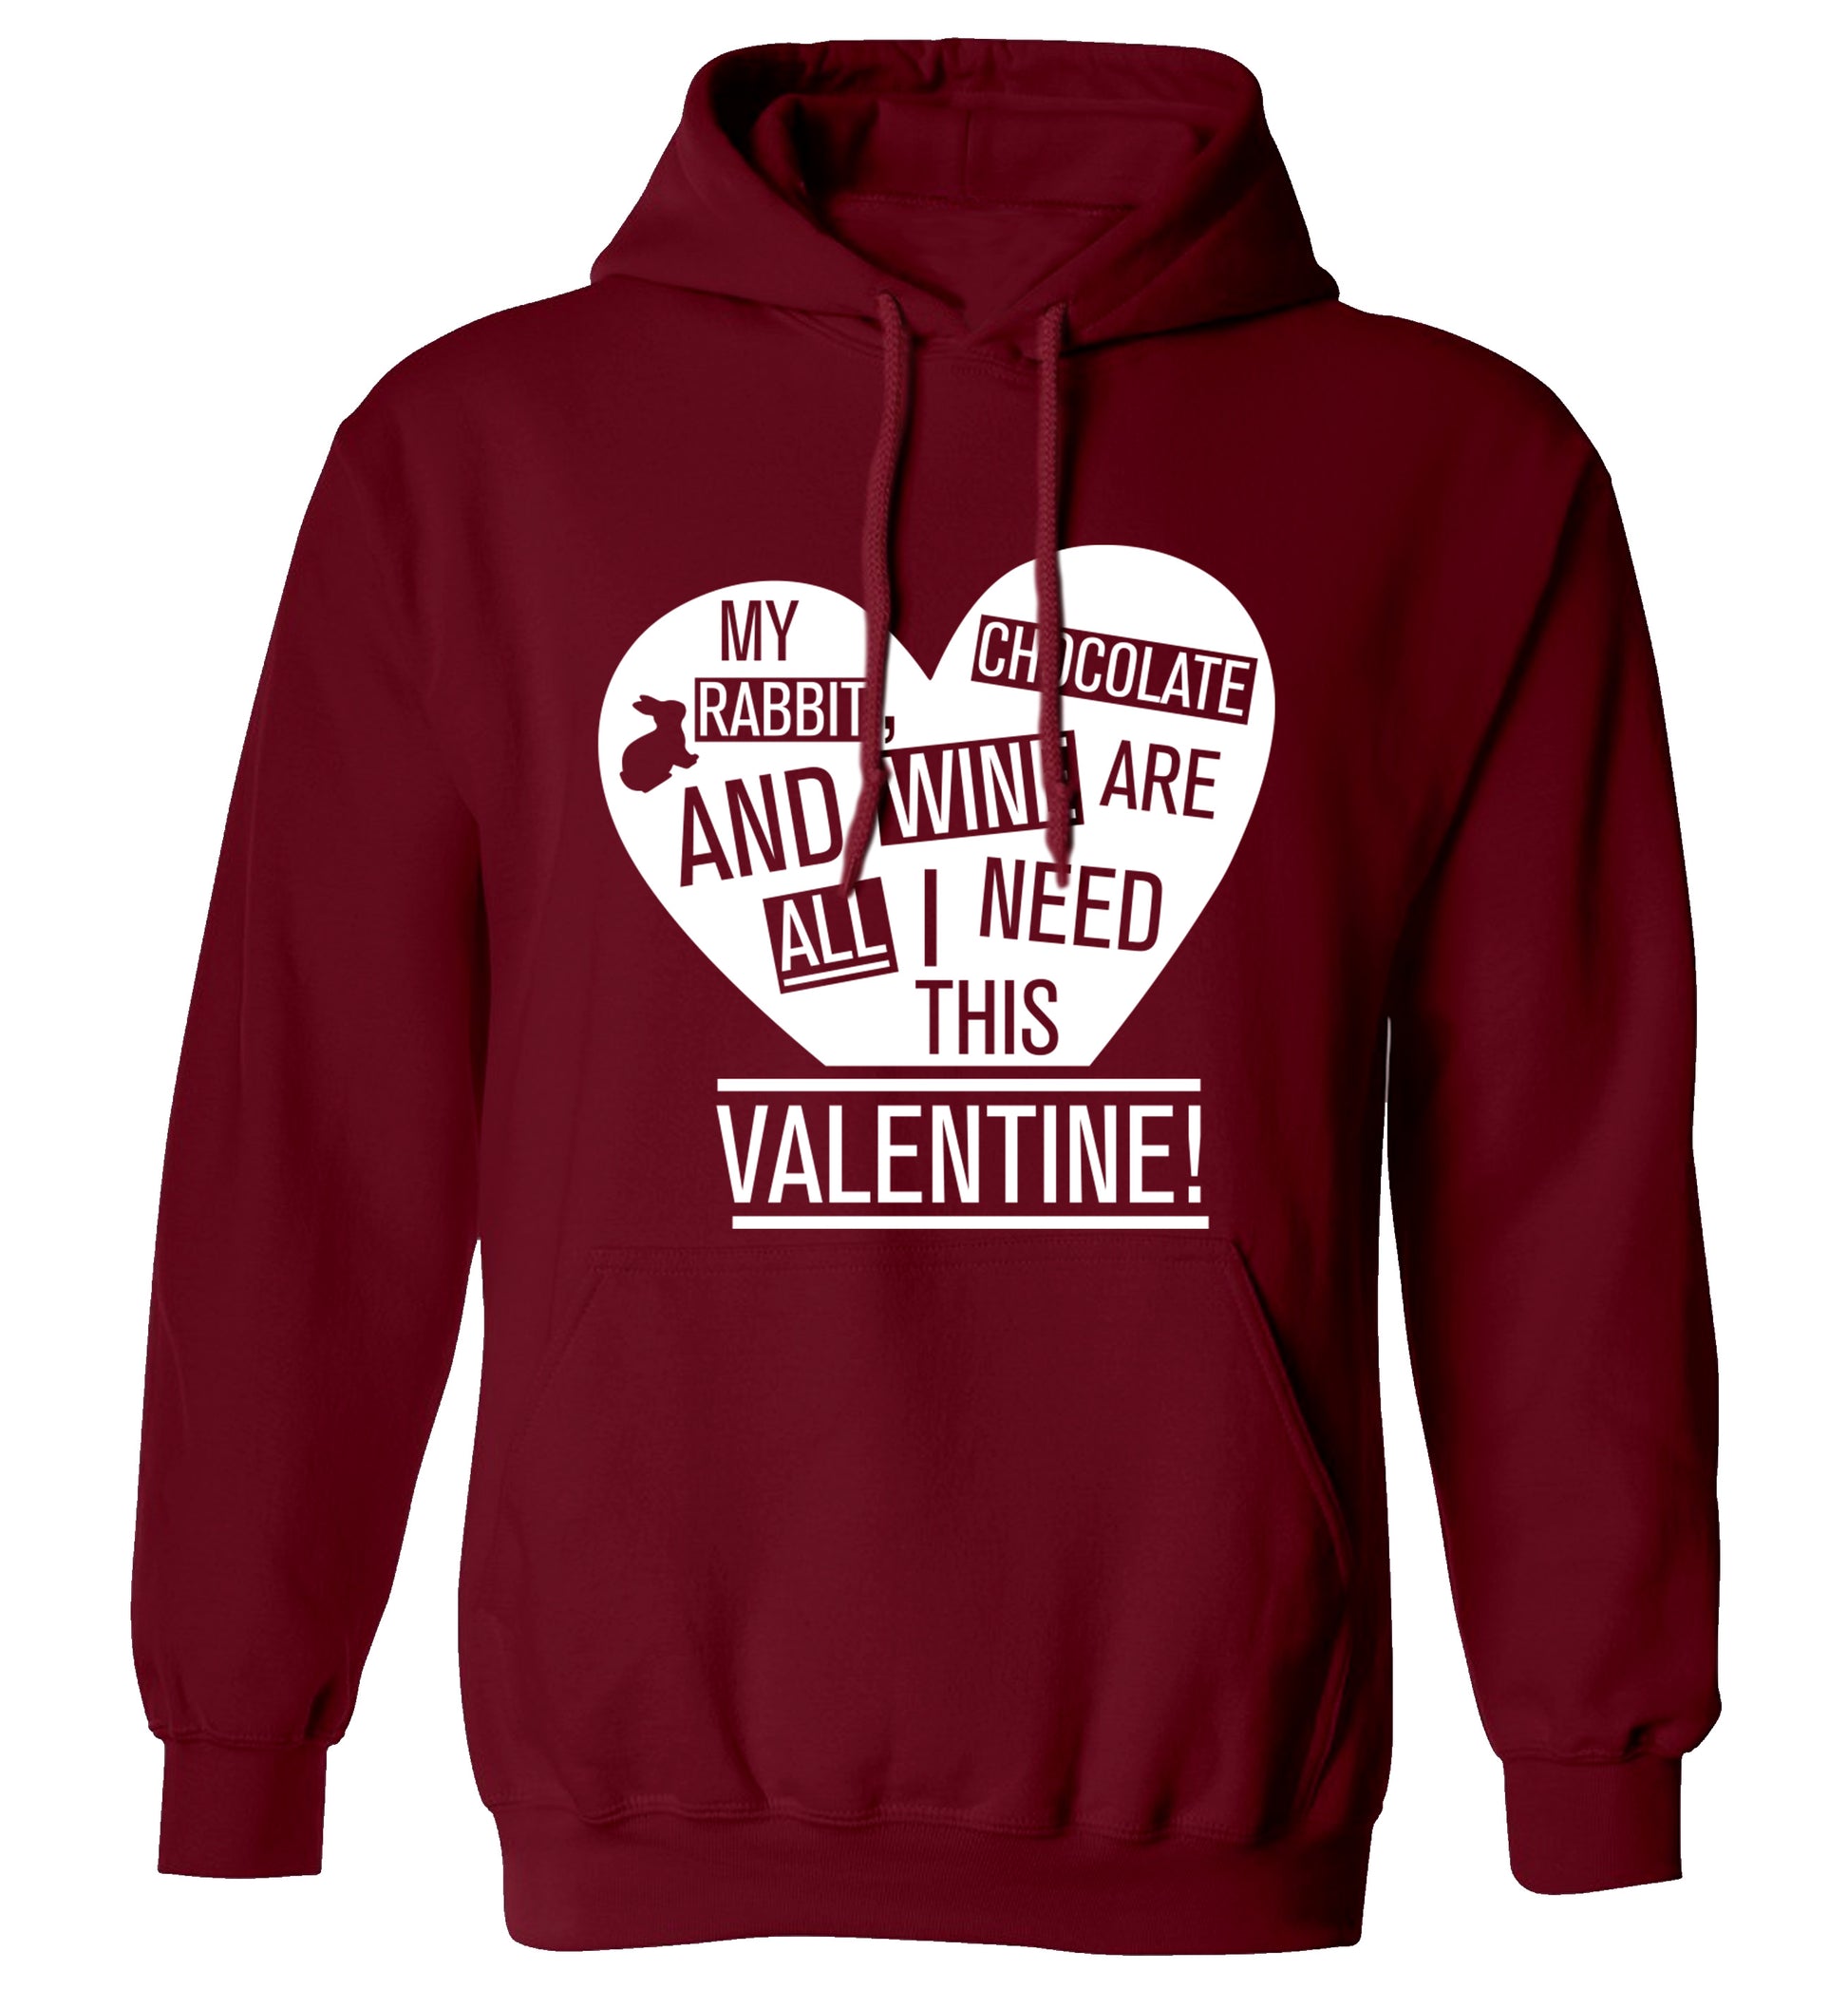 My rabbit, chocolate and wine are all I need this valentine! adults unisex maroon hoodie 2XL